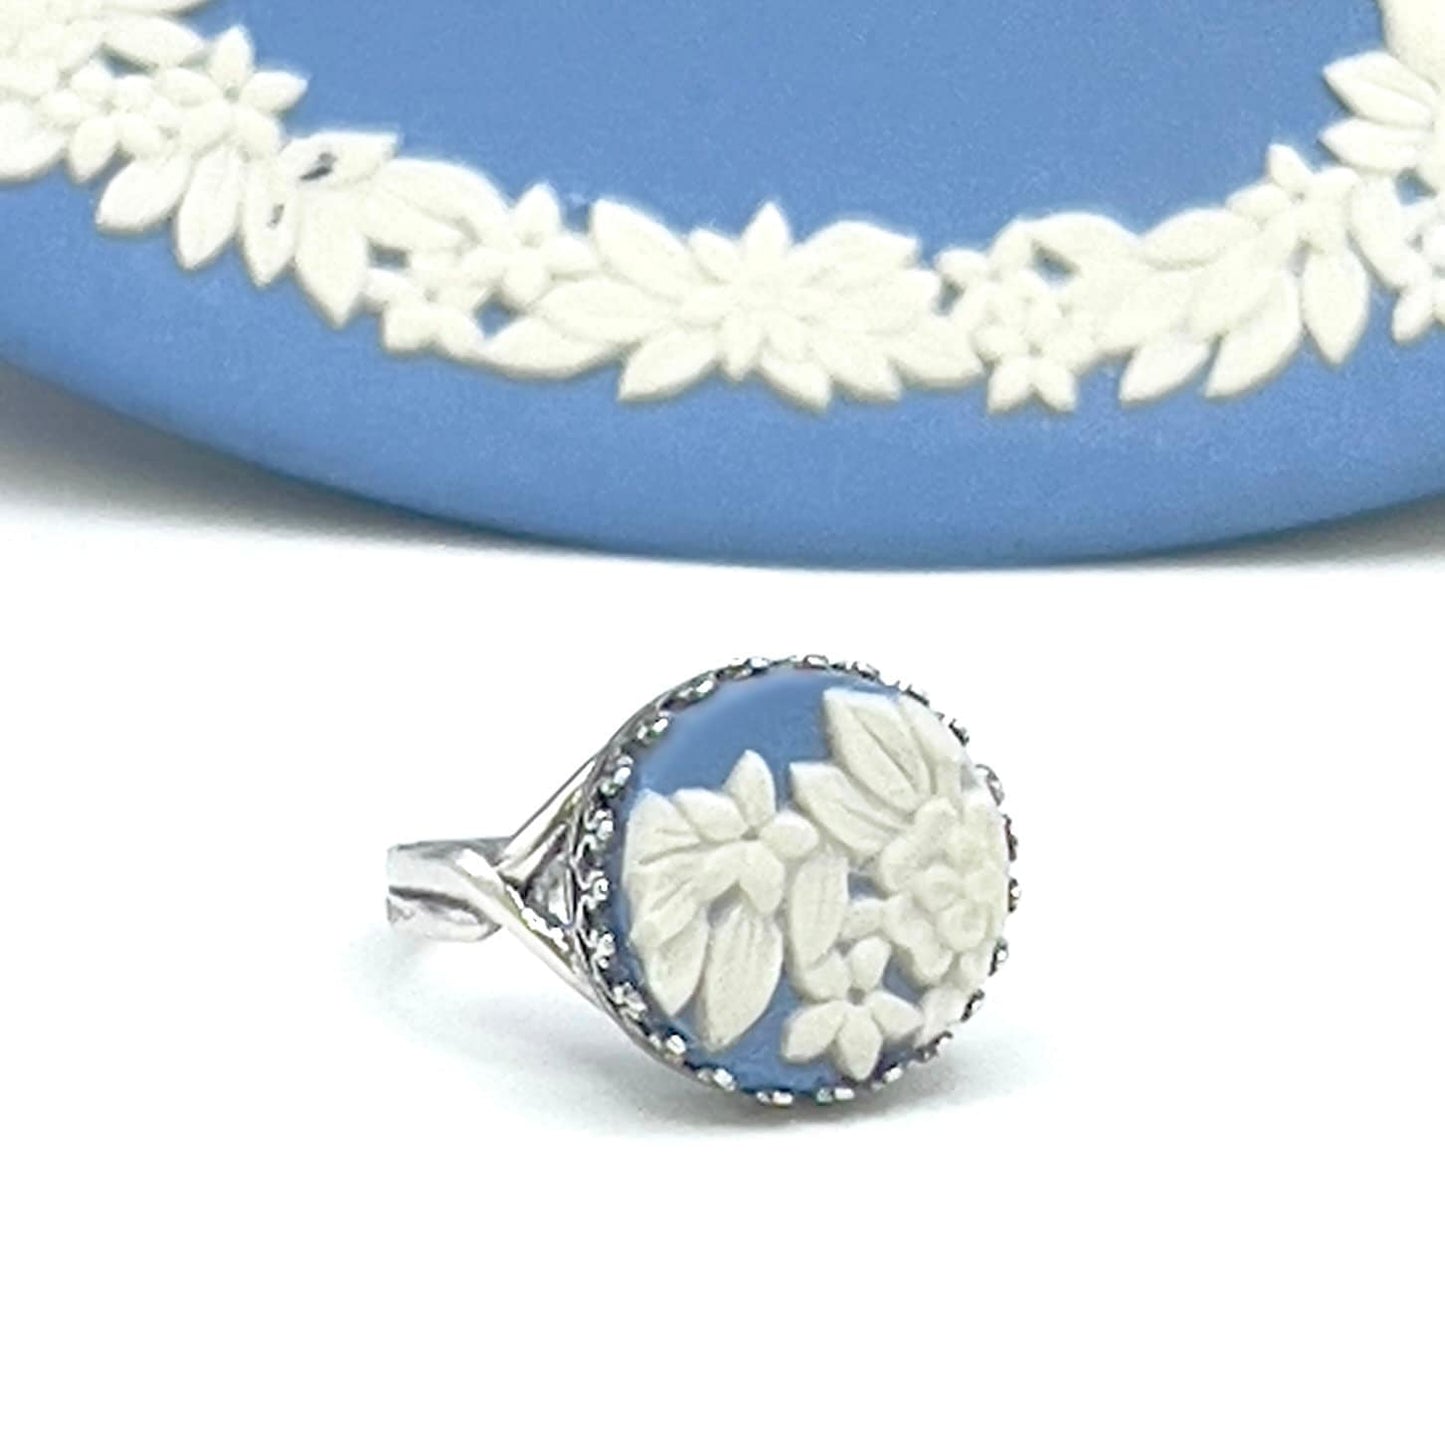 Wedgwood Jewelry, Jasperware Broken China Jewelry, Adjustable Sterling Silver Ring, Christmas Gift for Girlfriend, Unique Stocking Stuffer